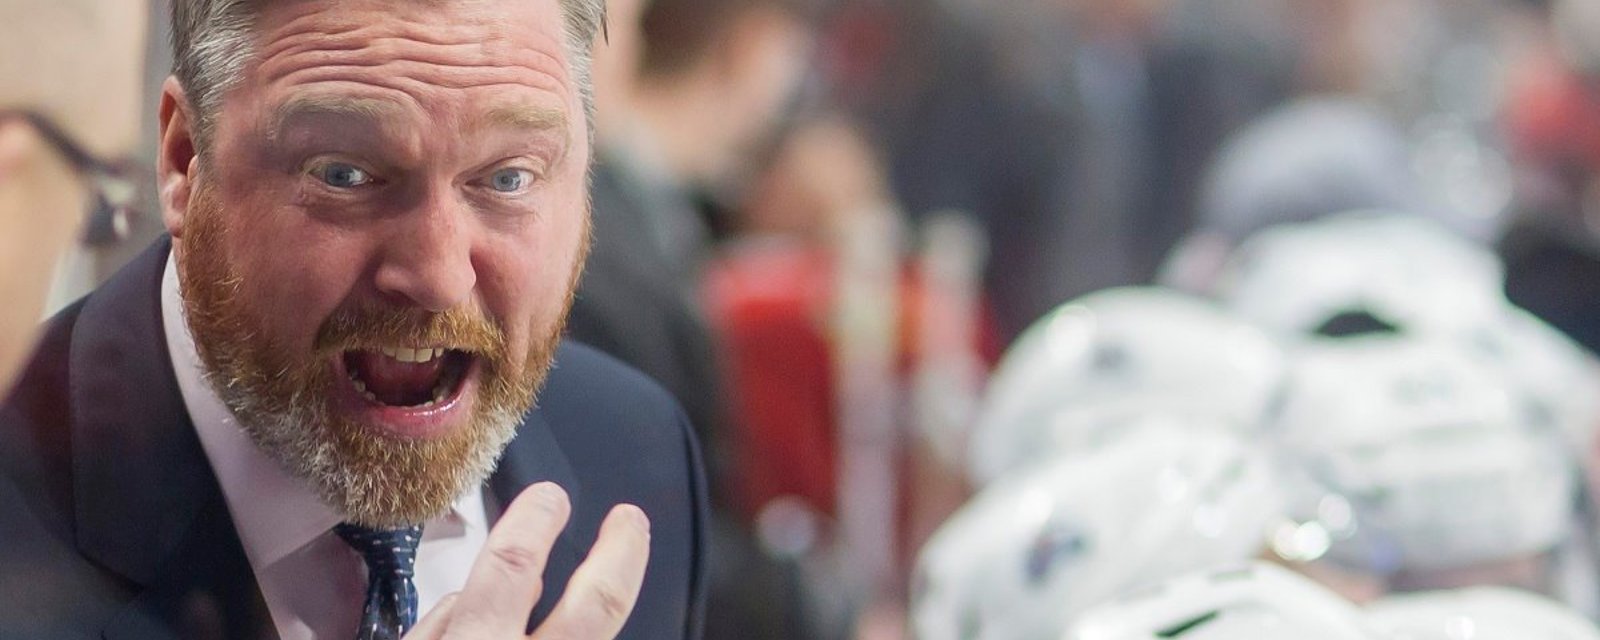 NHL legend Patrick Roy blows a gasket, gets in referee's face, and is ejected from the game.